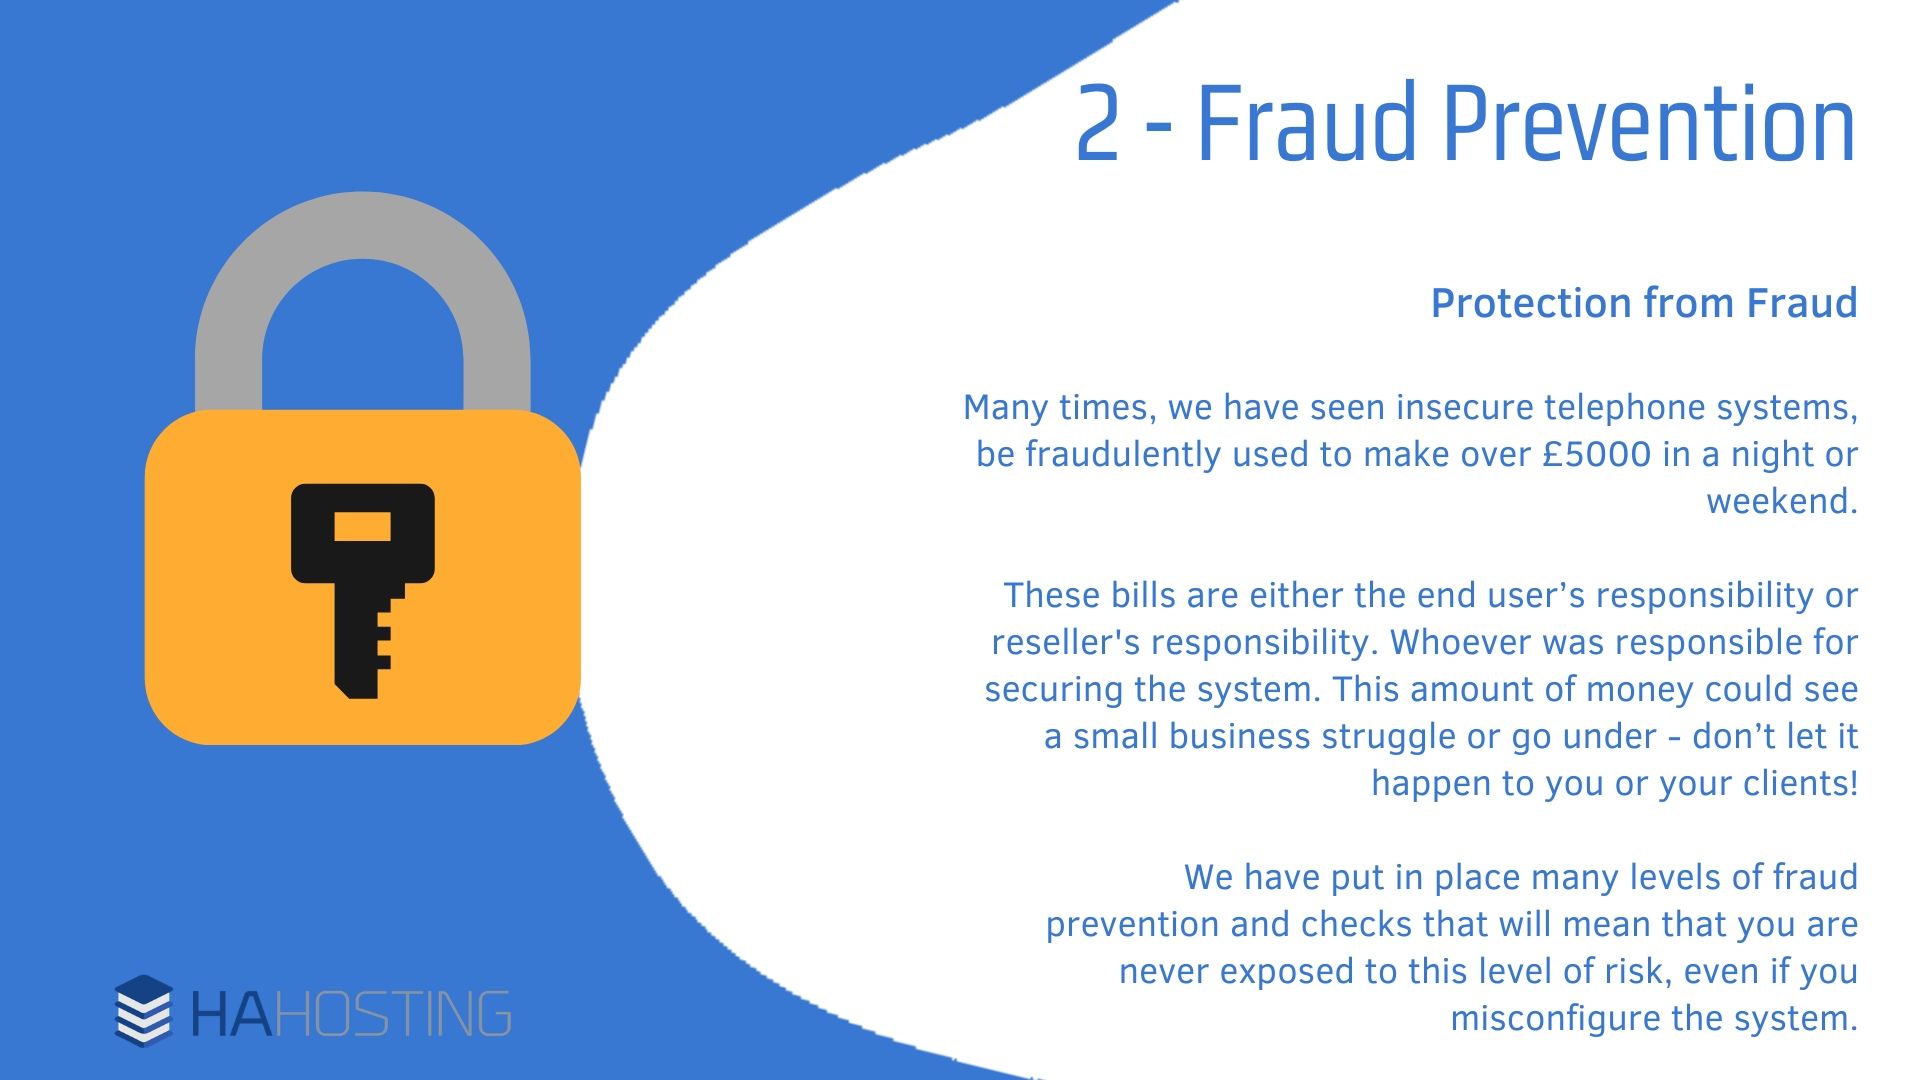 Fraud Prevention - Protection from Fraud Many times, we have seen insecure telephone systems, be fraudulently used to make over £5000 in a night or weekend. These bills are either the end user’s responsibility or reseller's responsibility. Whoever was responsible for securing the system. This amount of money could see a small business struggle or go under - don’t let it happen to you or your clients! We have put in place many levels of fraud prevention and checks that will mean that you are never exposed to this level of risk, even if you misconfigure the system